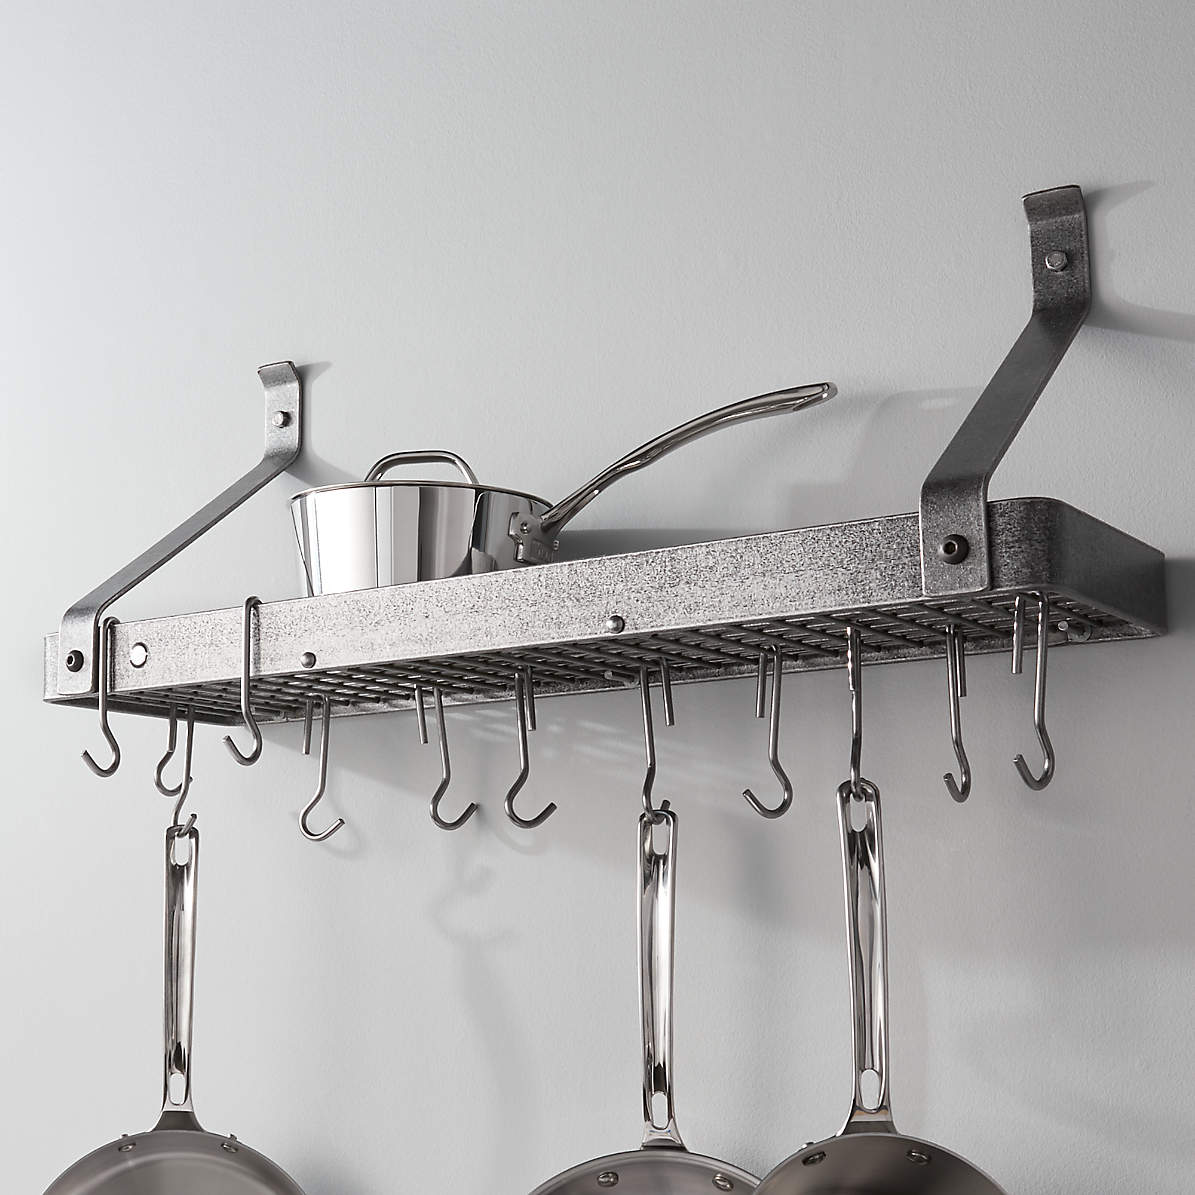 Enclume - Three Bar Ceiling Pot Rack in Hammered Steel - Enclume